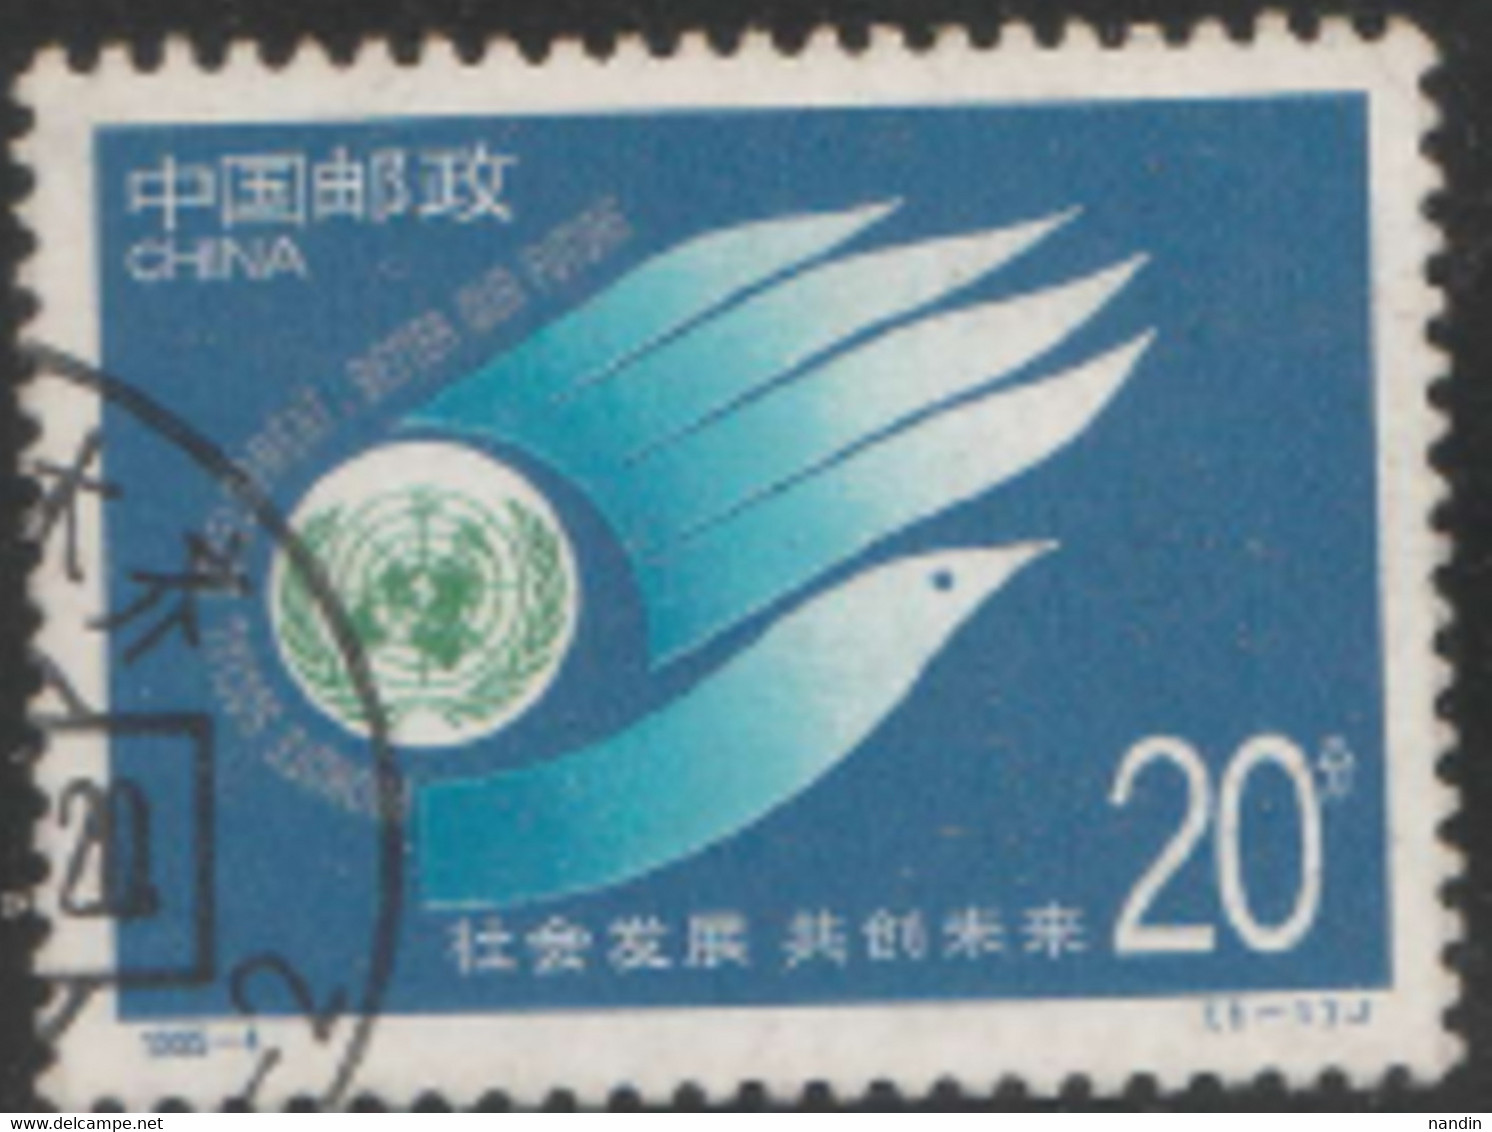 USED STAMP From CHINA 1995 Stamp  On United Nations World Summit For Social Development, Copenhagen - Oblitérés